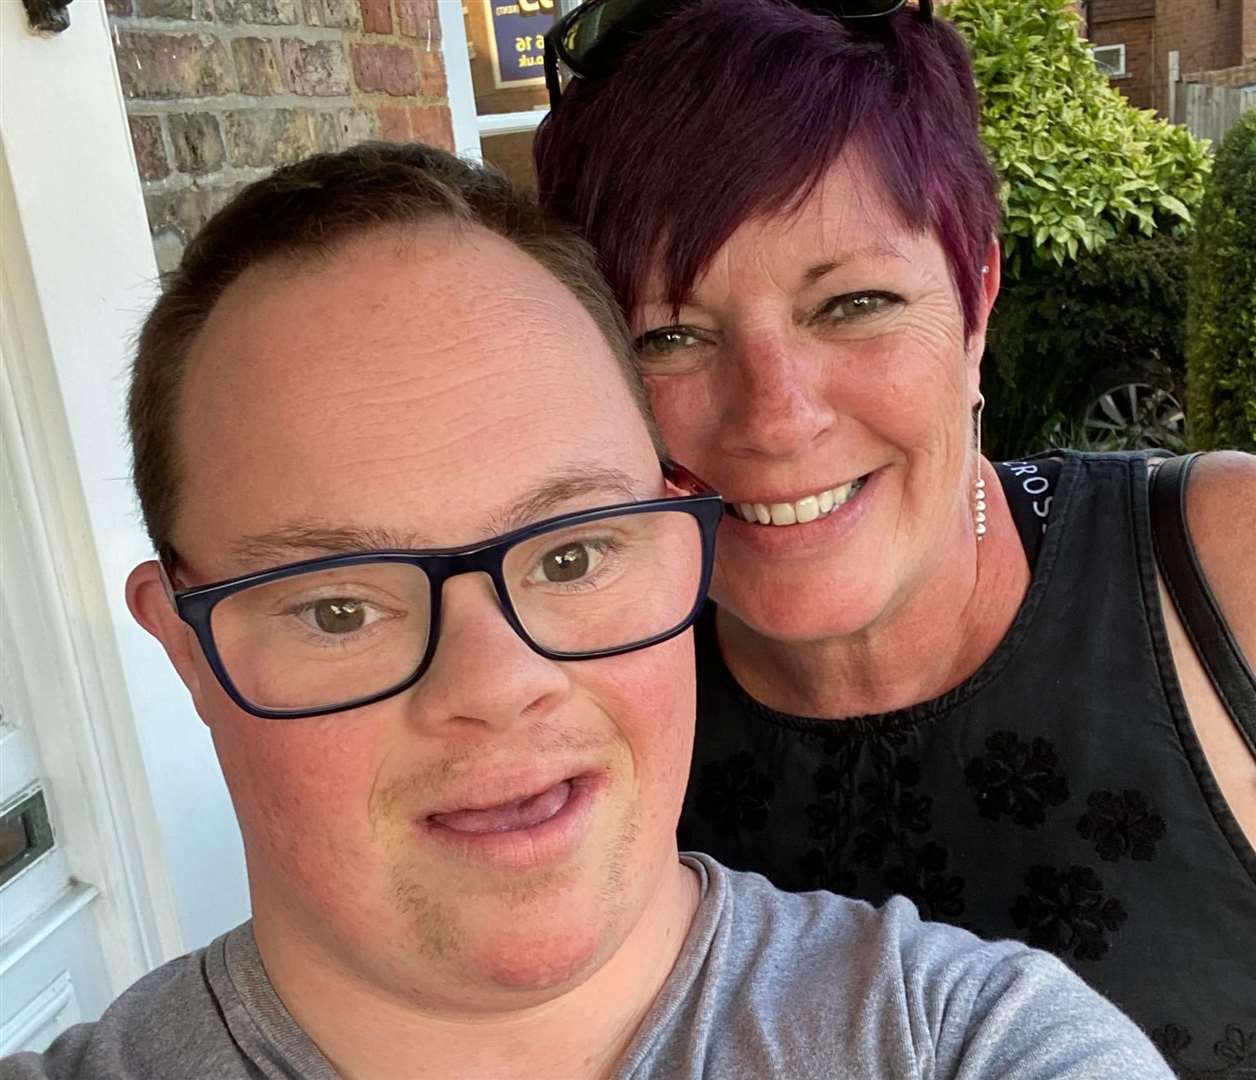 Vikki Kimber says her son Daniel, who has Down’s syndrome, is "losing his independence" because of the bus cancellations. Picture: Vikki Kimber